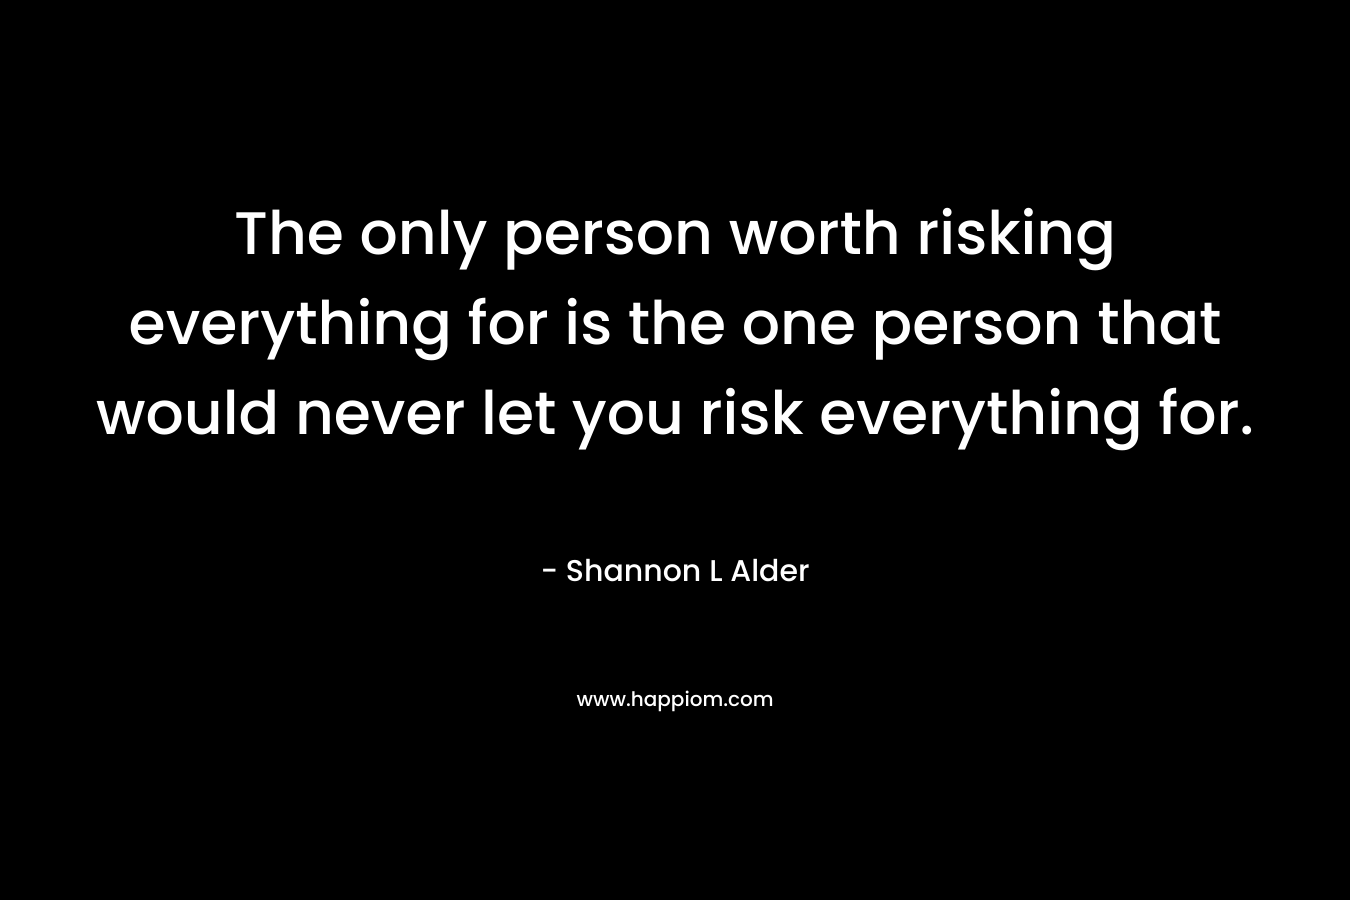 The only person worth risking everything for is the one person that would never let you risk everything for. – Shannon L Alder